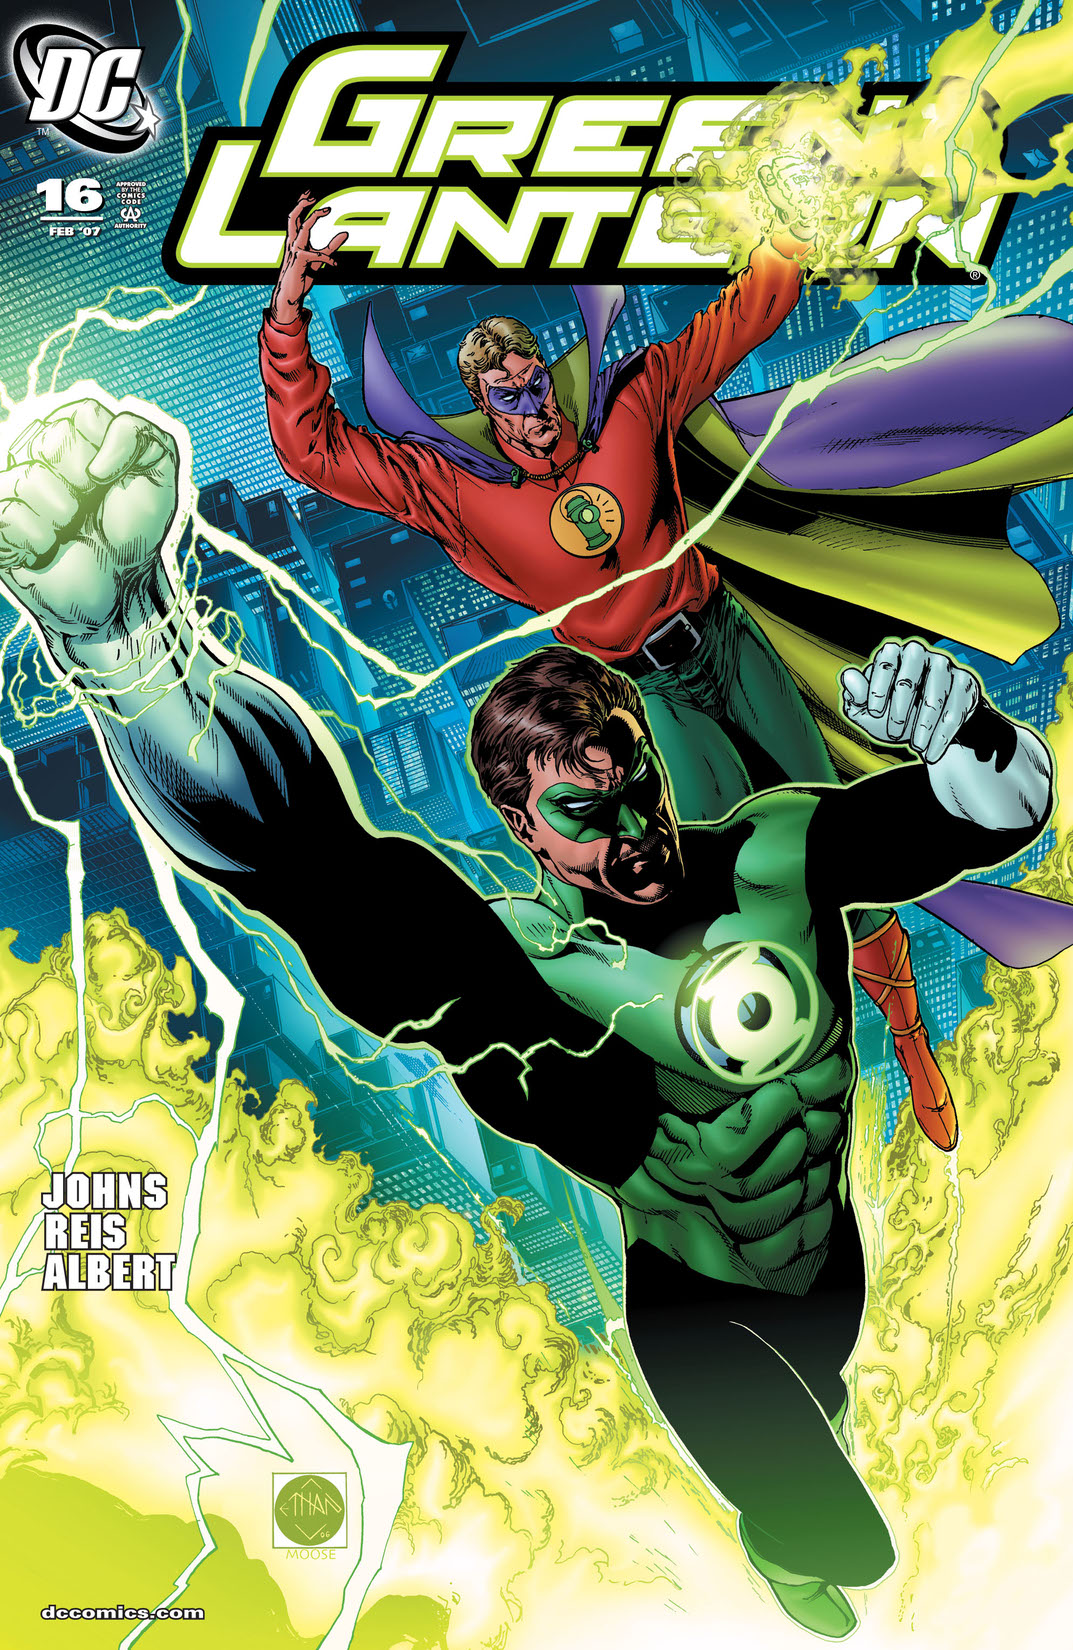 Green Lantern (2005-) #16 preview images